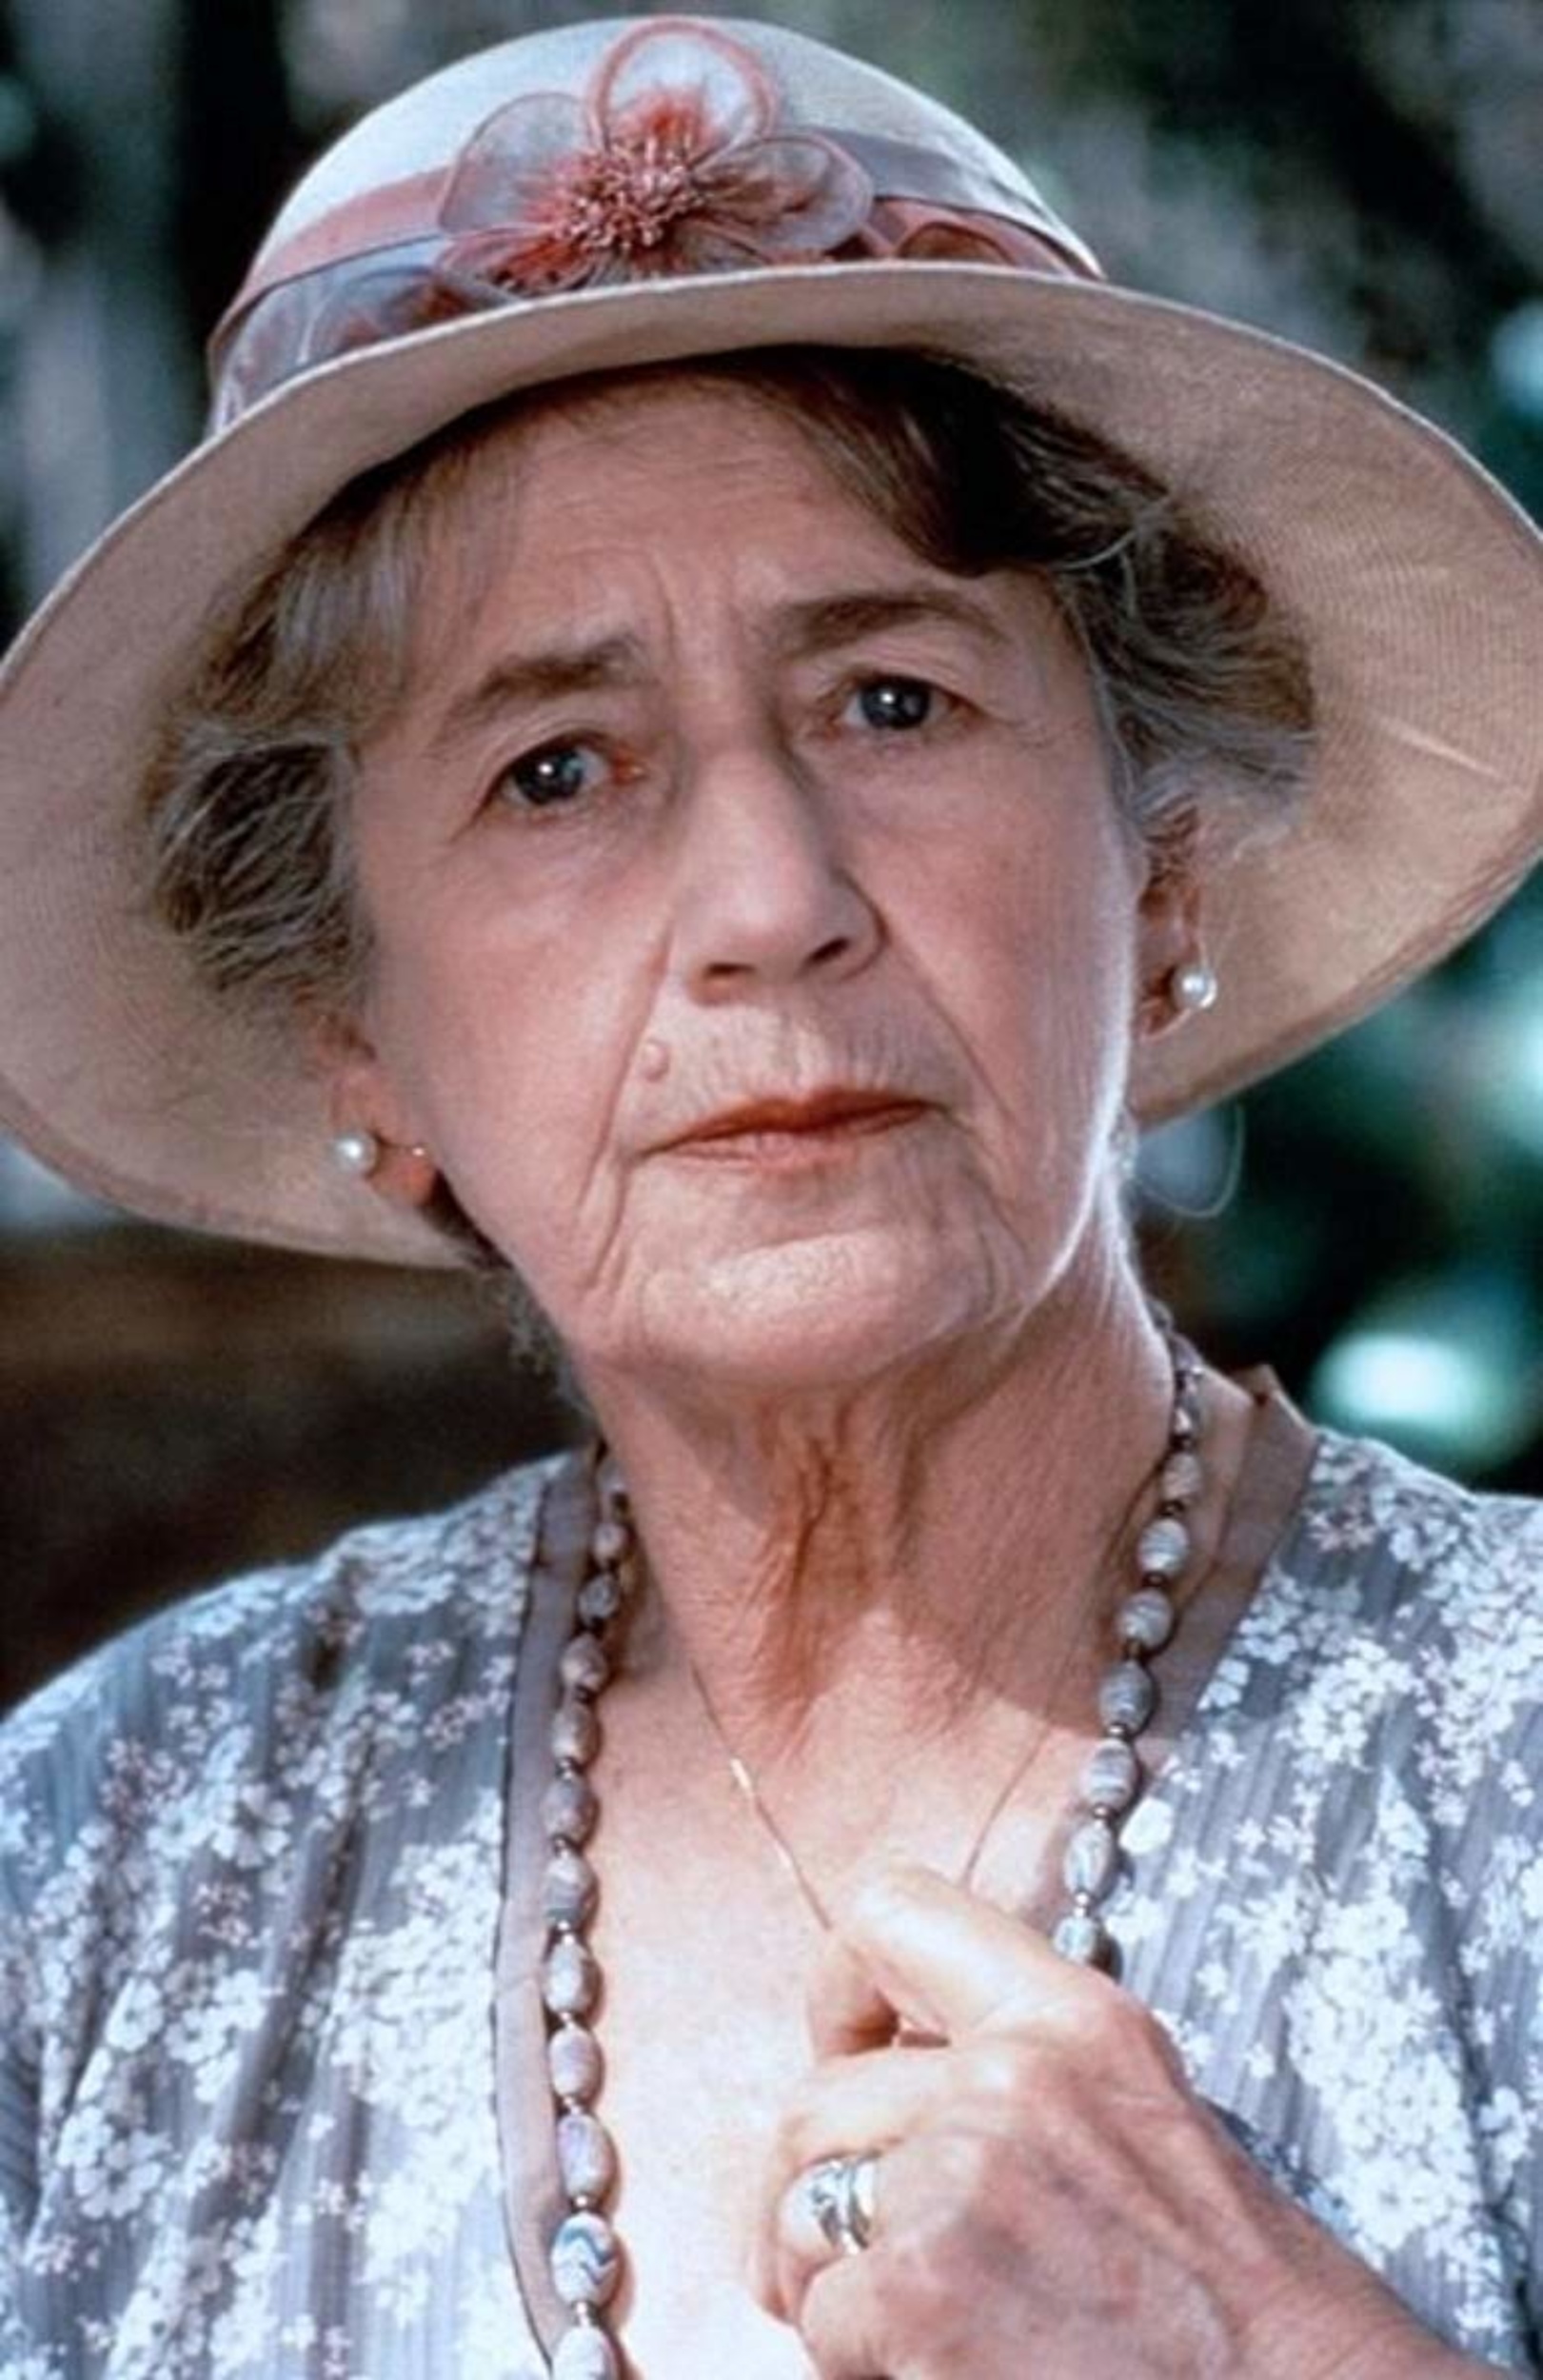 <p>One of the great stage actors of the twentieth century, Peggy Ashcroft received a big-screen curtain call – and a Best Supporting Actress Oscar – in 1984 with this lovely portrayal of an elderly, kind-hearted English woman eager for adventure in “the real India”. This was David Lean’s final feature (his first since the disaster of 1970’s “Ryan’s Daughter”), and he’s far more focused on the characters situated amidst the landscape than visual sweep (though the latter is there when it matters). As a result, Ashcroft serves as our spiritual guide through this intimate journey of personal discovery.</p><p><a href='https://www.msn.com/en-us/community/channel/vid-cj9pqbr0vn9in2b6ddcd8sfgpfq6x6utp44fssrv6mc2gtybw0us'>Follow us on MSN to see more of our exclusive entertainment content.</a></p>